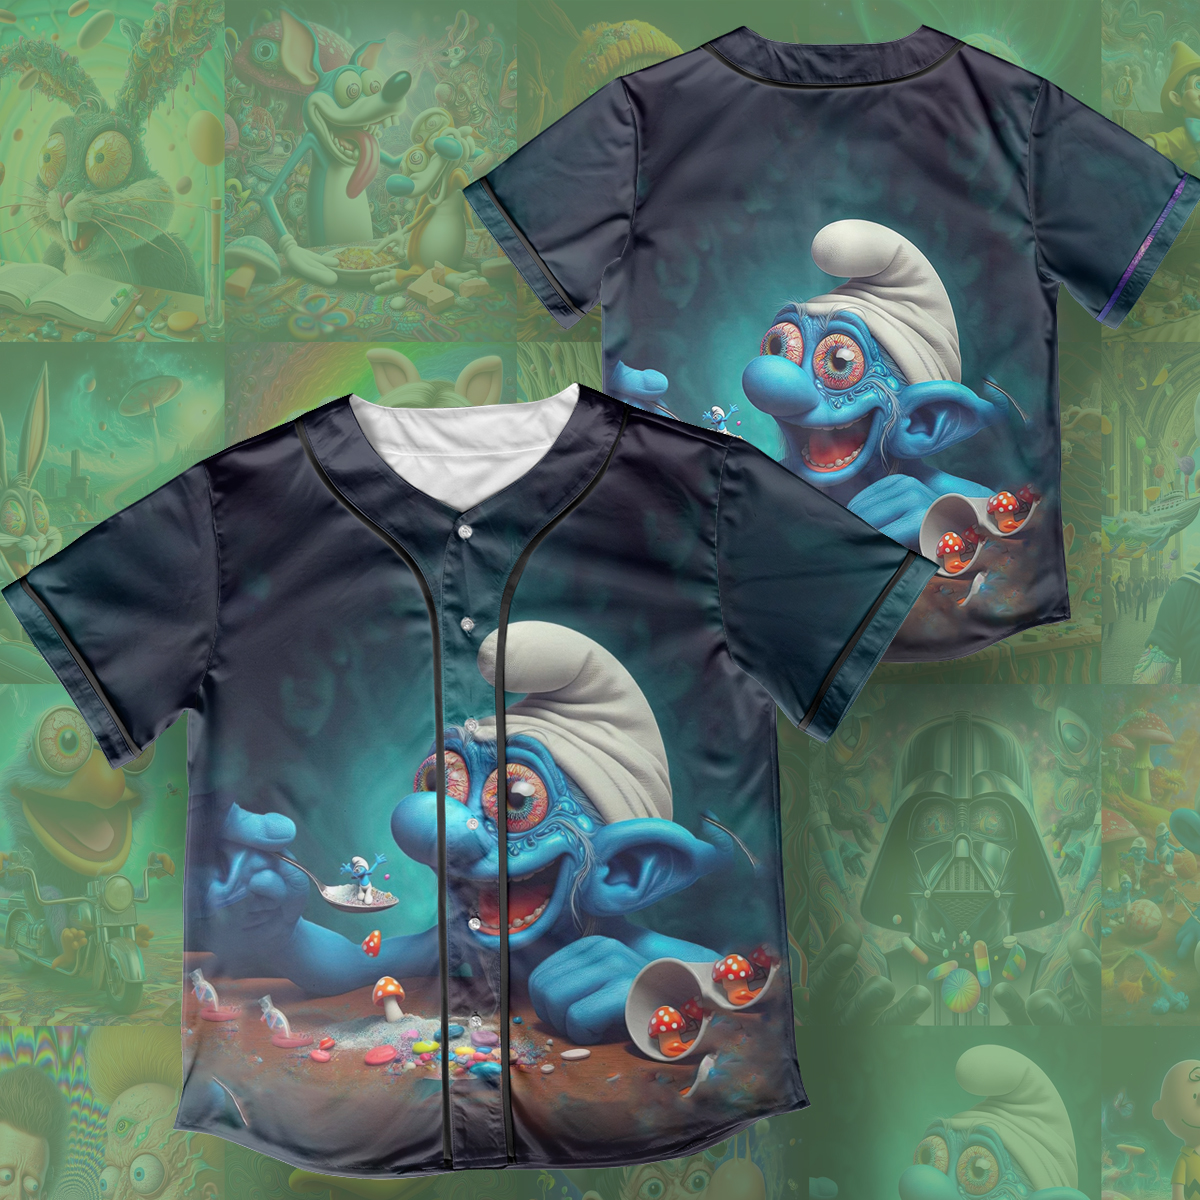 Smurfs Psychedelic Style Cover Rave Edm Jersey